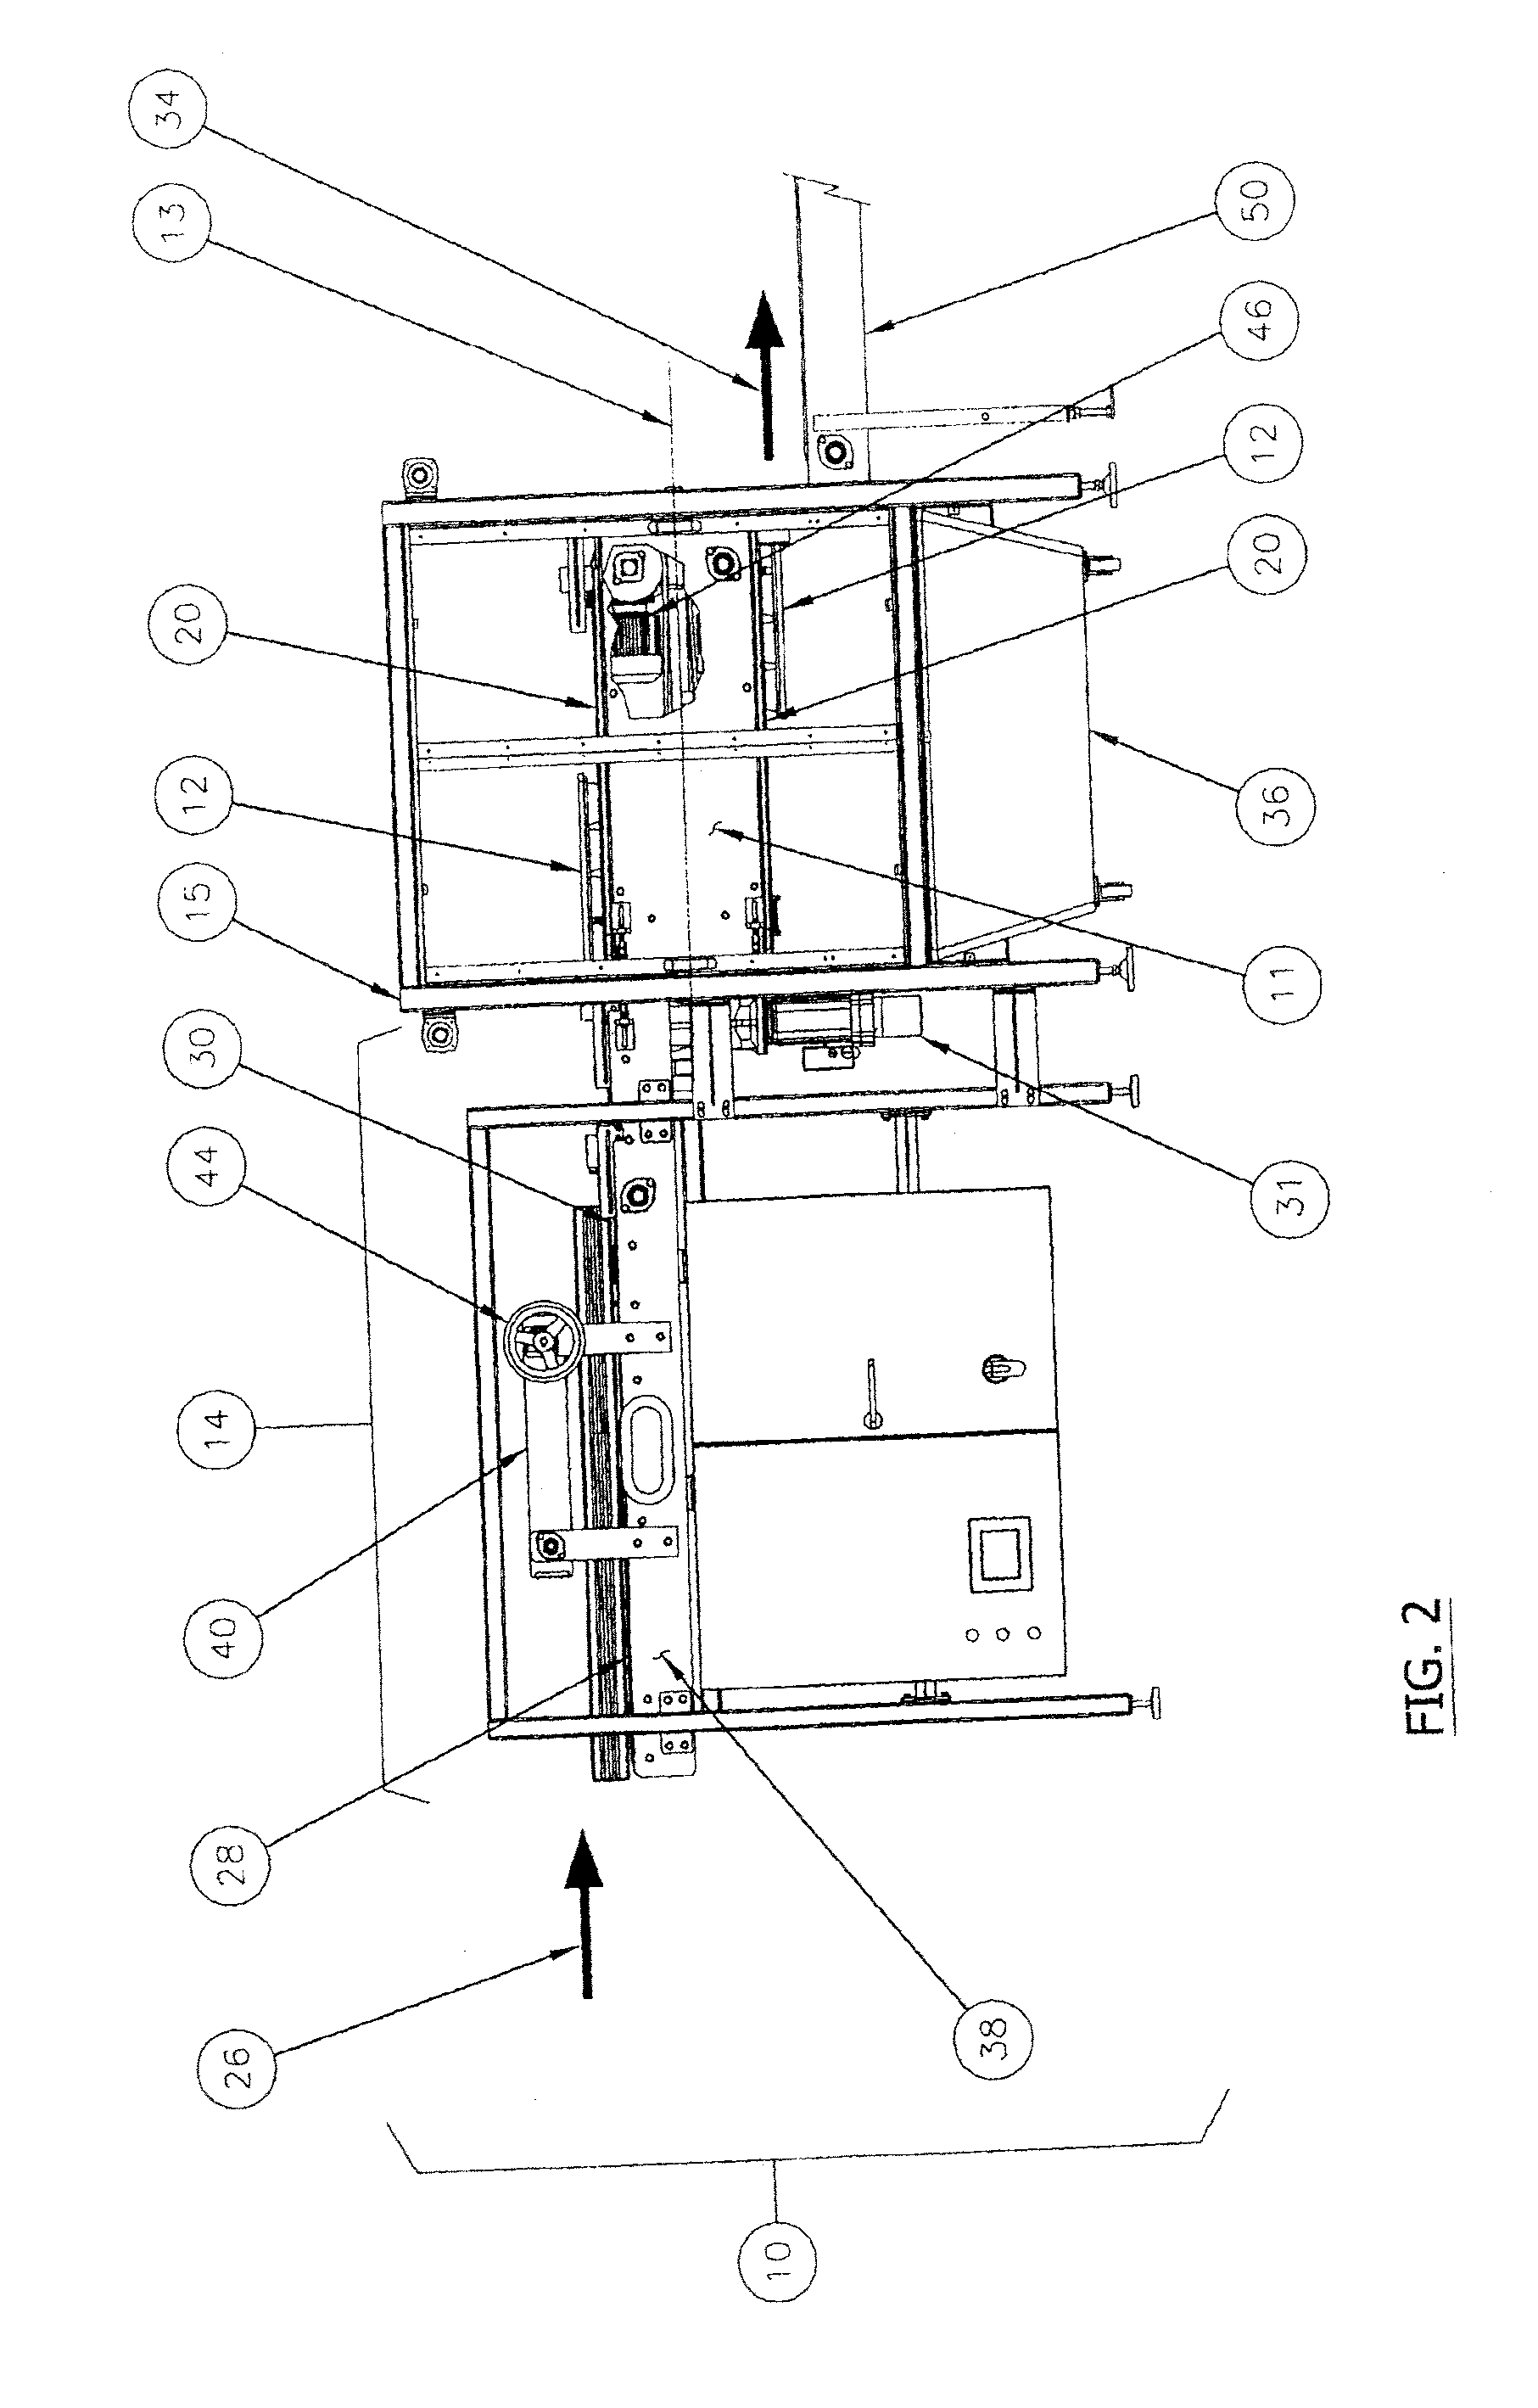 Pan inverting and/or cleaning system